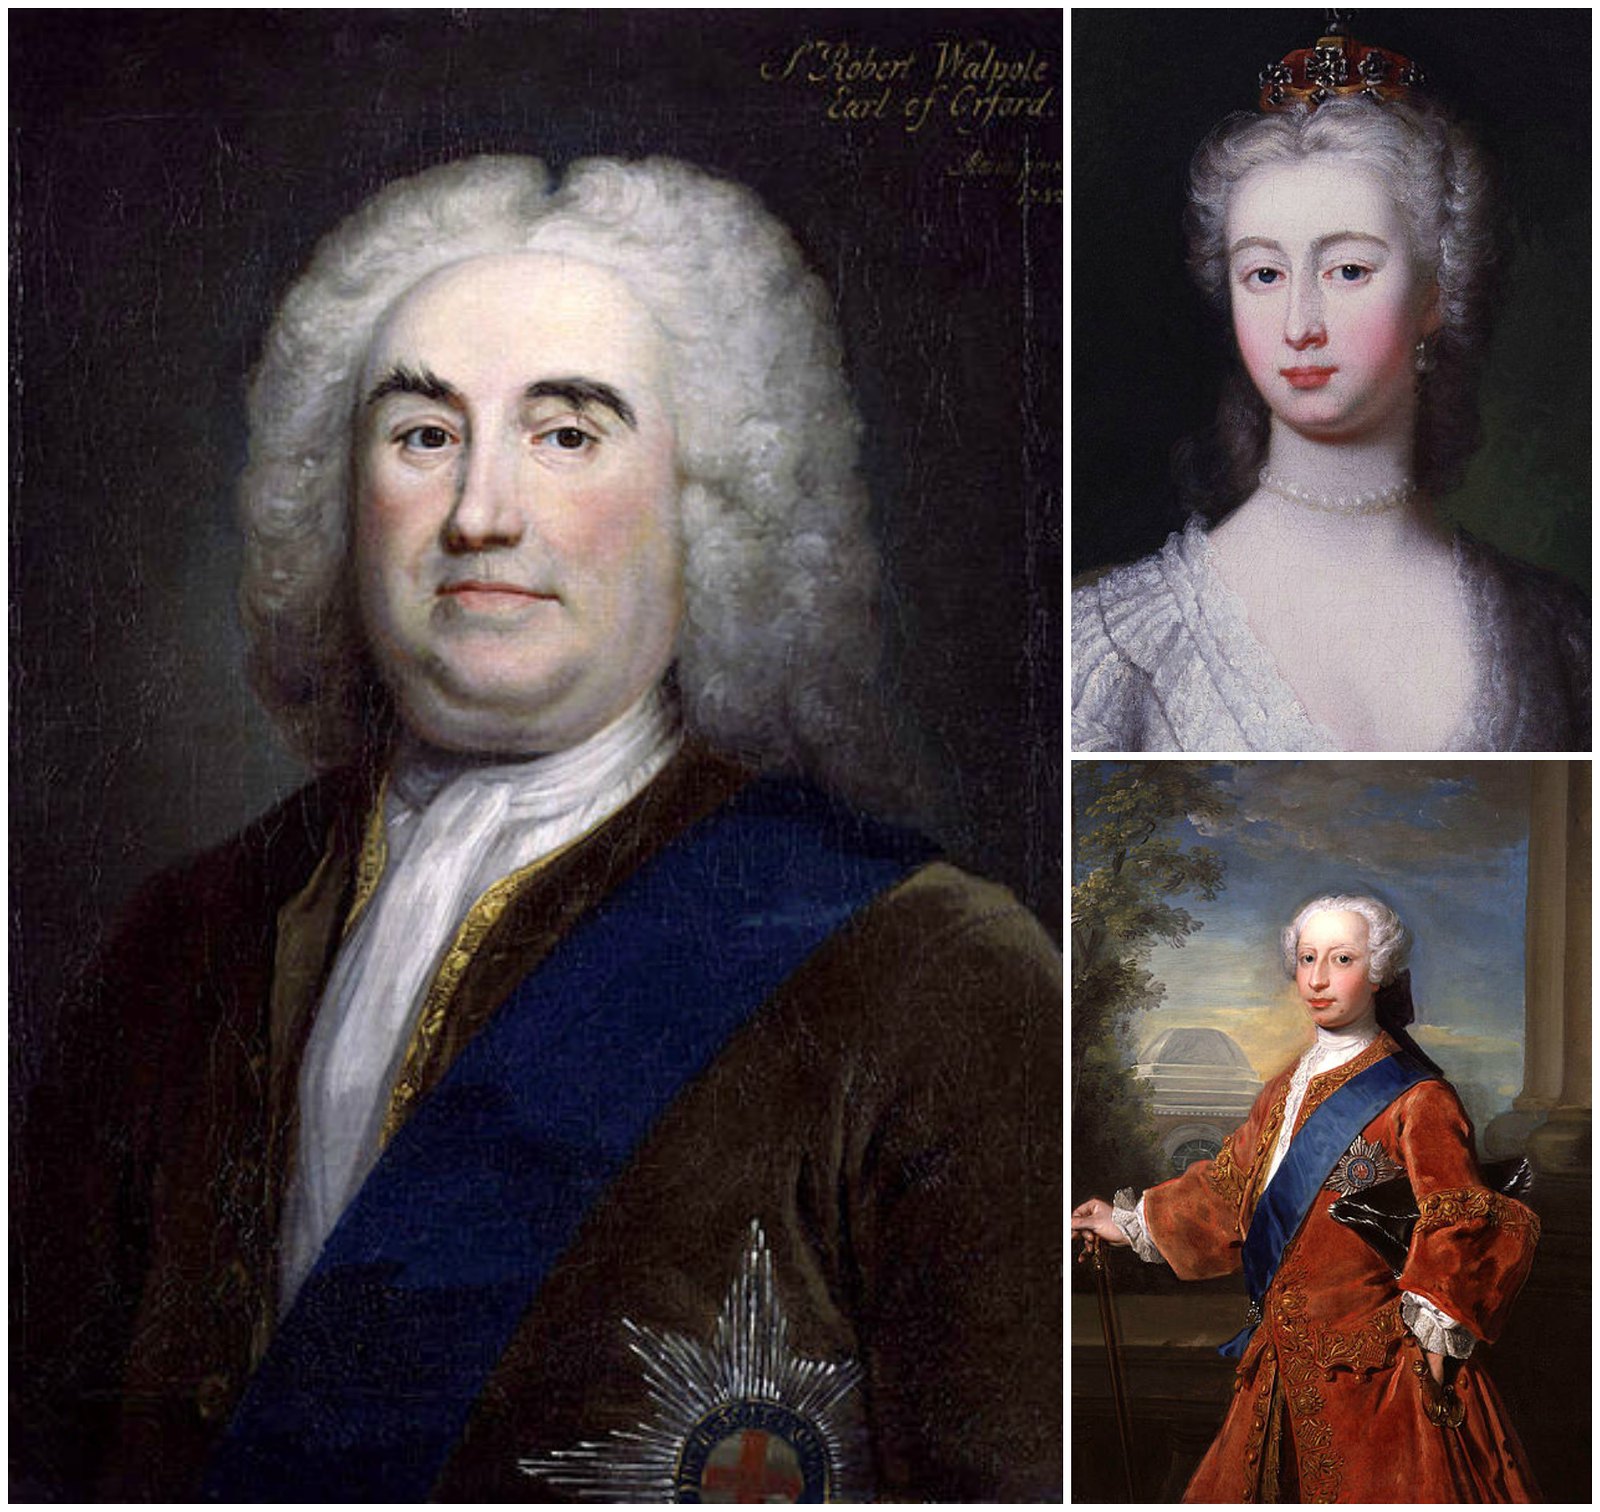 Robert Walpole, 1st Earl of Orford and Prime Minister of Great Britain (left) preferred Augusta of Saxe-Gotha (top right) as a match for Frederick, Prince of Wales (lower right)